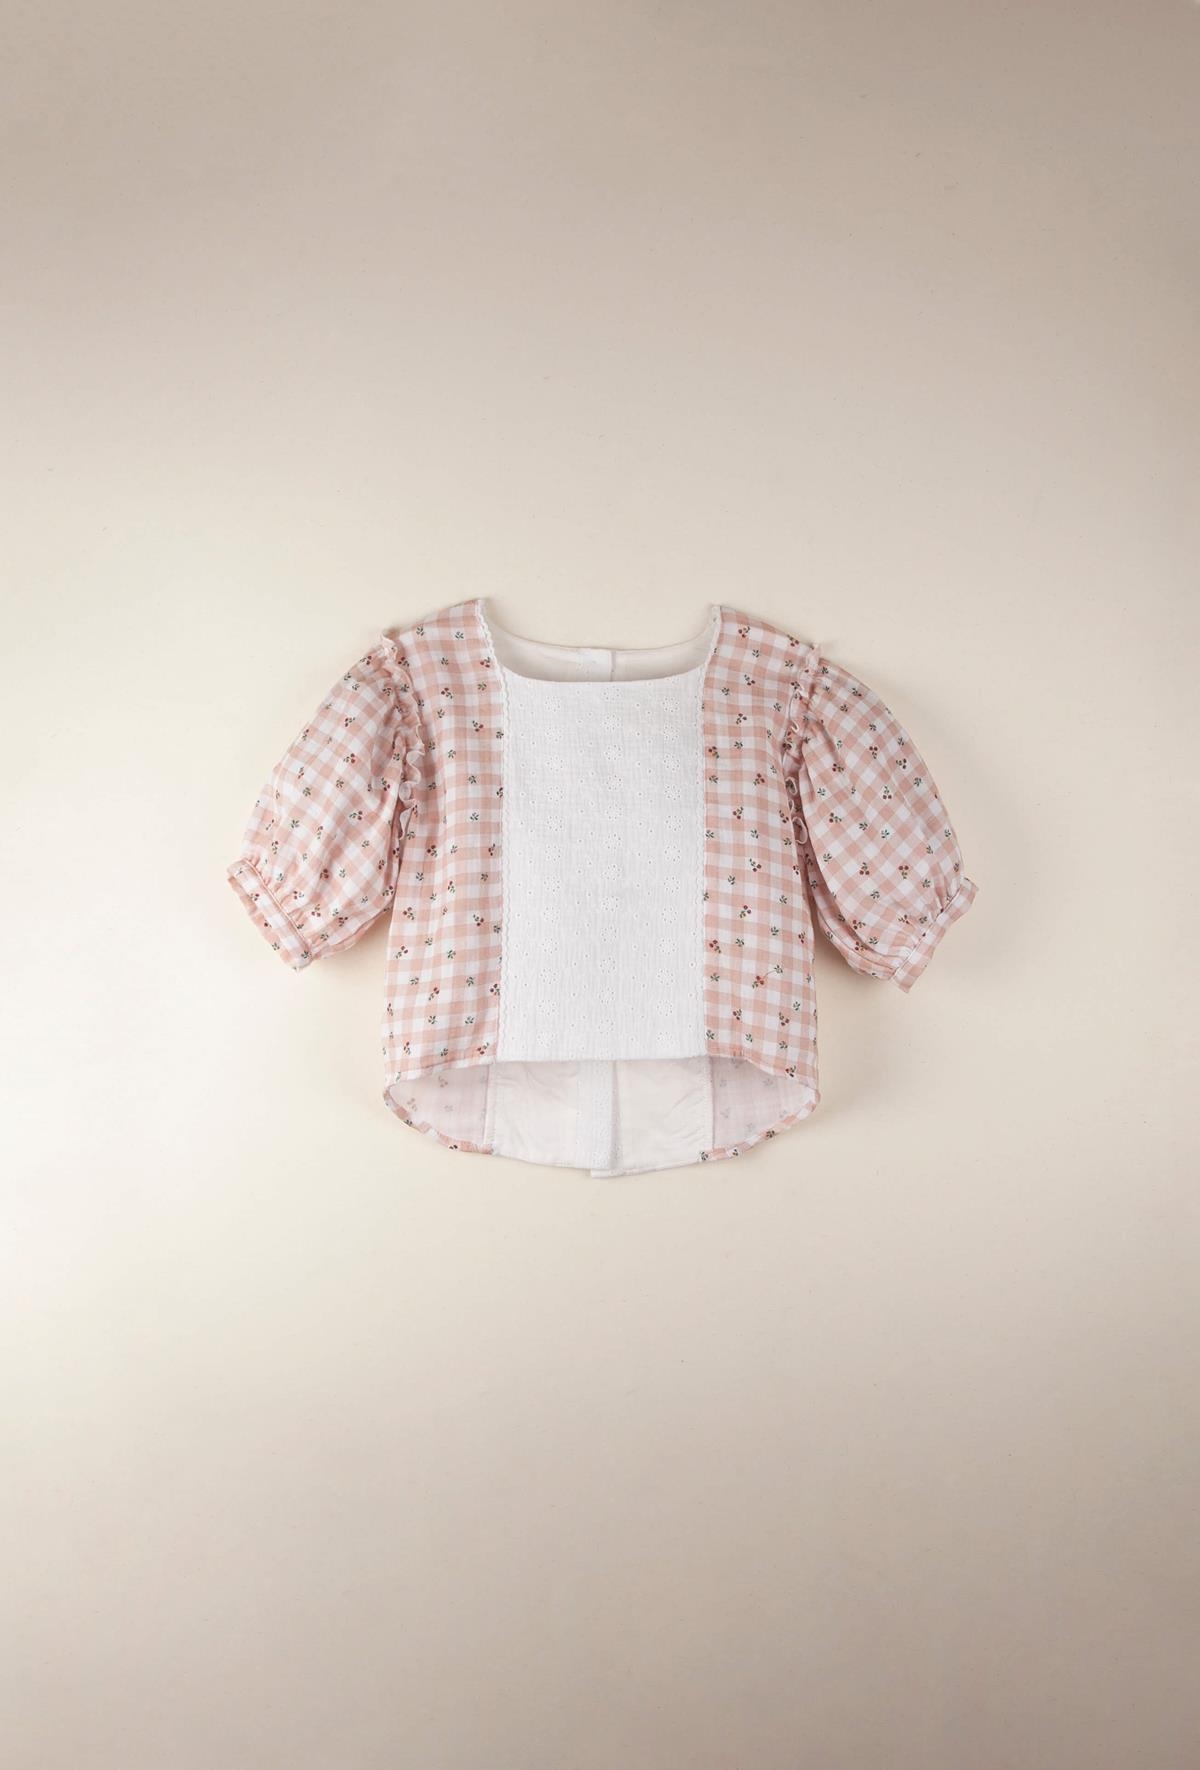 Mod.18.3 Gingham and floral organic blouse with puffed sleeve | SS22 Mod.18.3 Gingham and floral organic blouse with puffed sleeve | 1